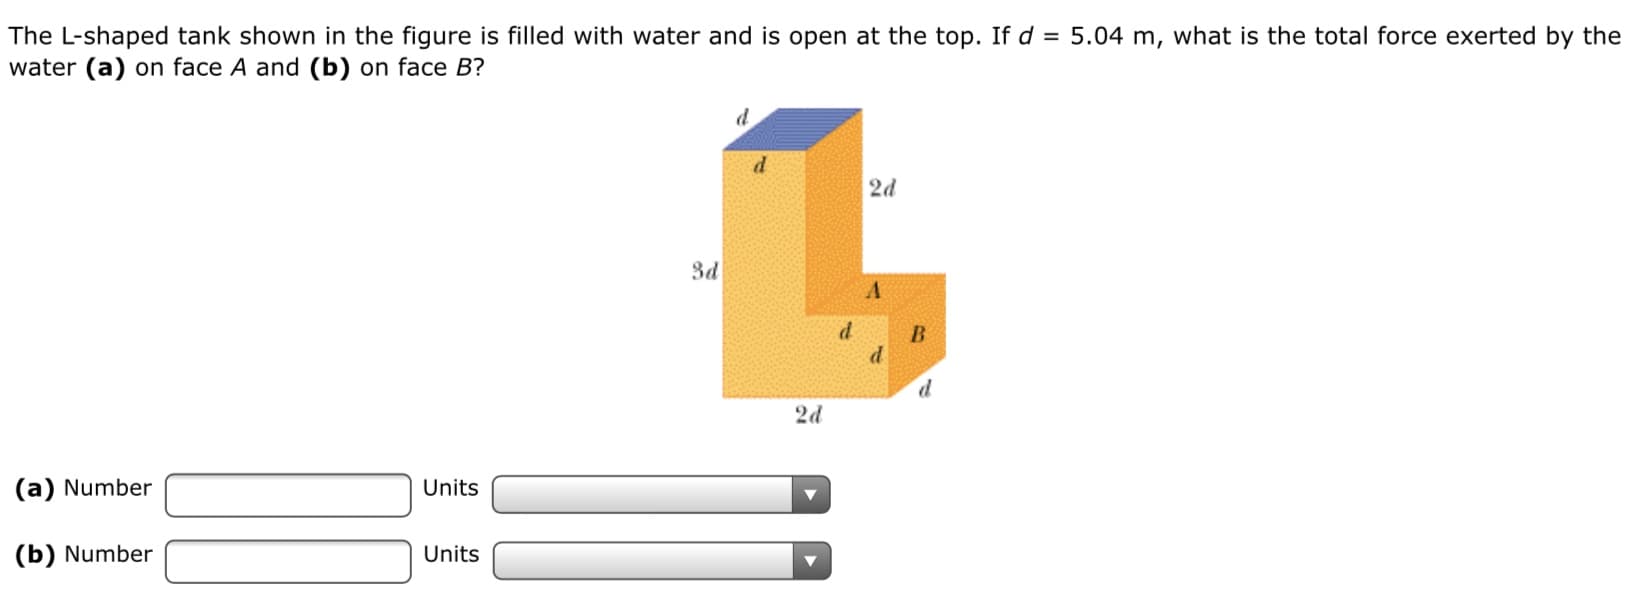 The L-shaped tank shown in the figure is filled with water and is open at the top. If d = 5.04 m, what is the total force exerted by the
water (a) on face A and (b) on face B?
d.
2d
3d
2d
(a) Number
Units
(b) Number
Units
